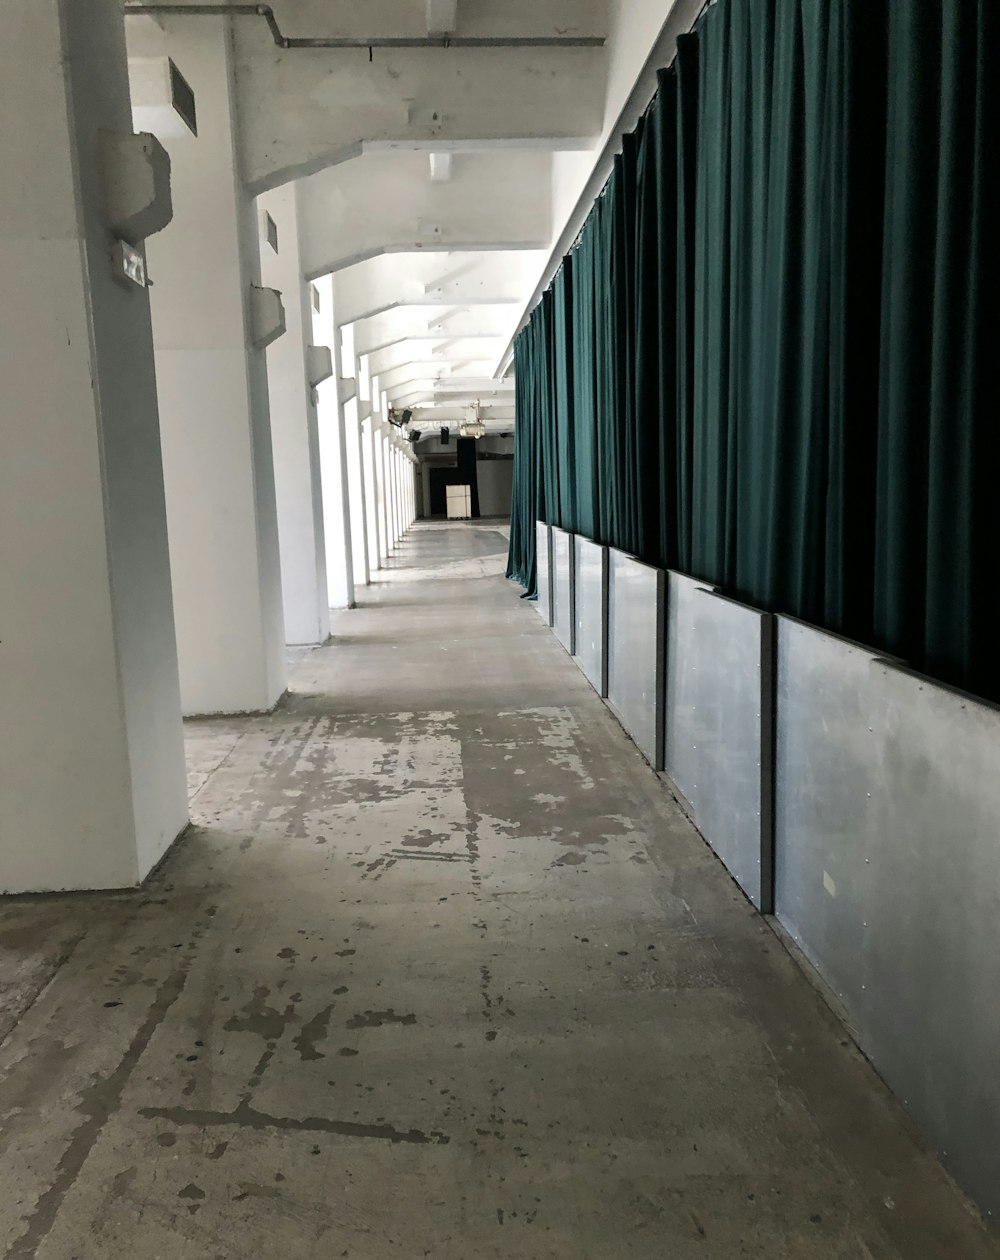 a long hallway with green curtains on the side of it